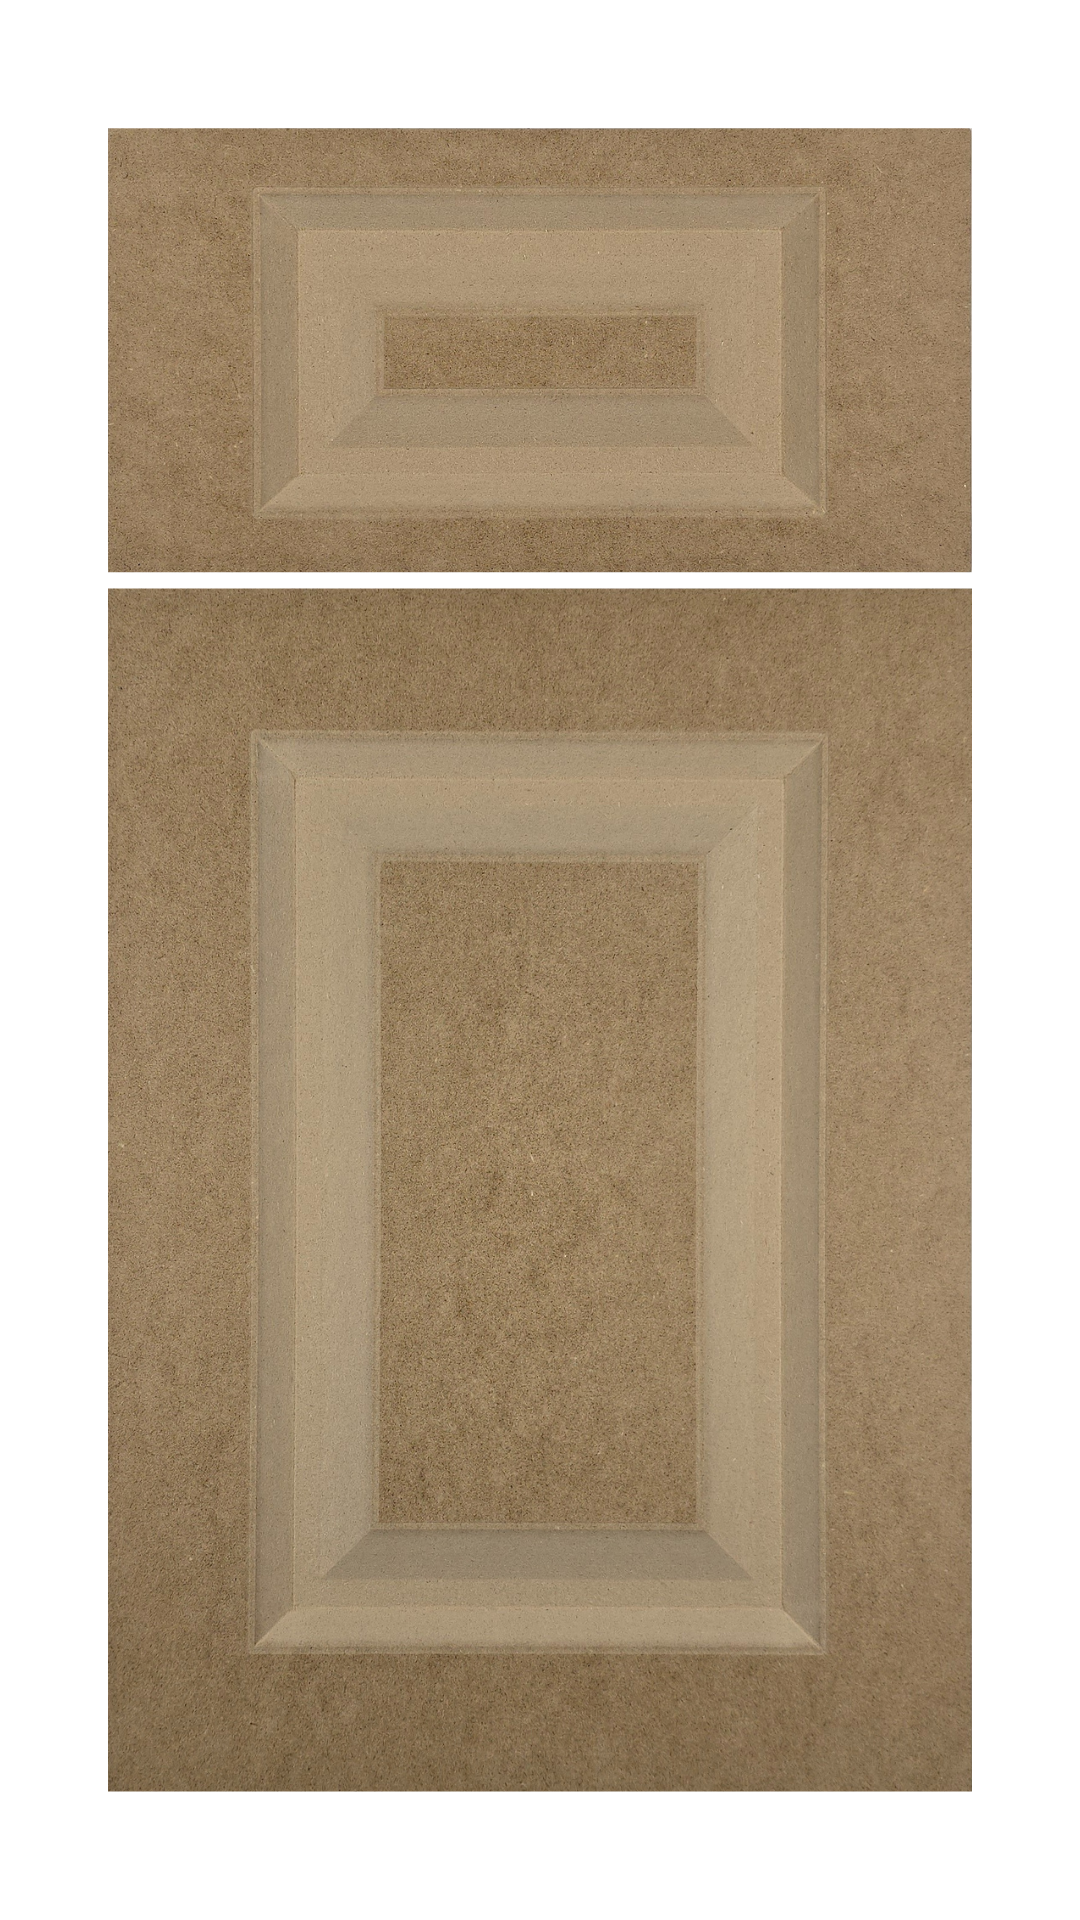 The Hudson cabinet door has a raised panel, deep 2 step u-shaped groove that is very wide, and square corners.